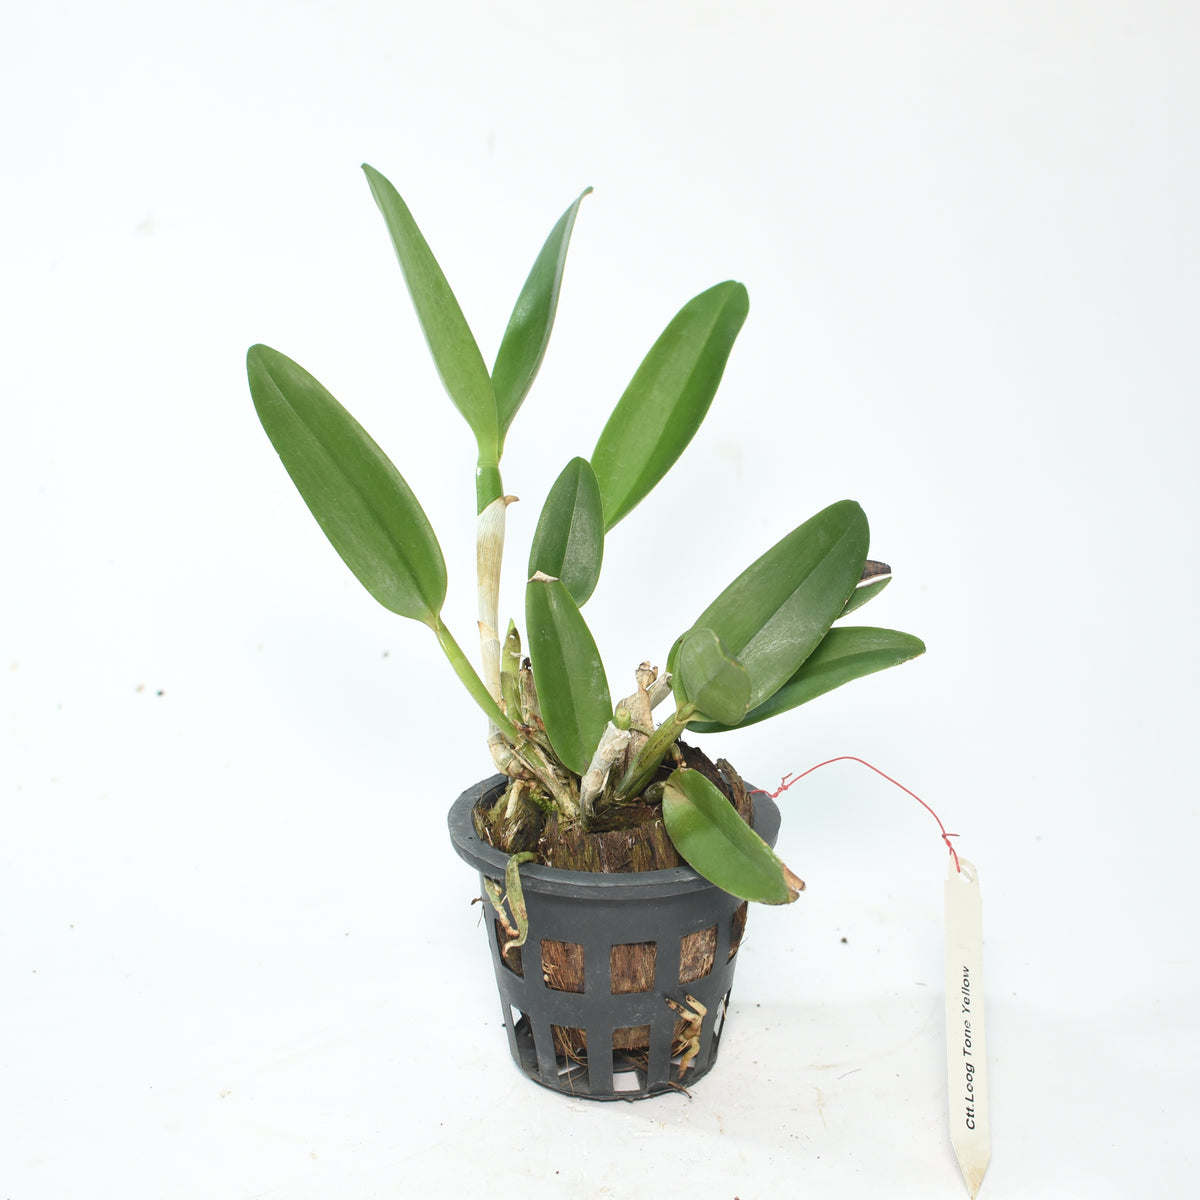 This orchid thrives both indoors and outdoors, making it a versatile addition to your garden or home